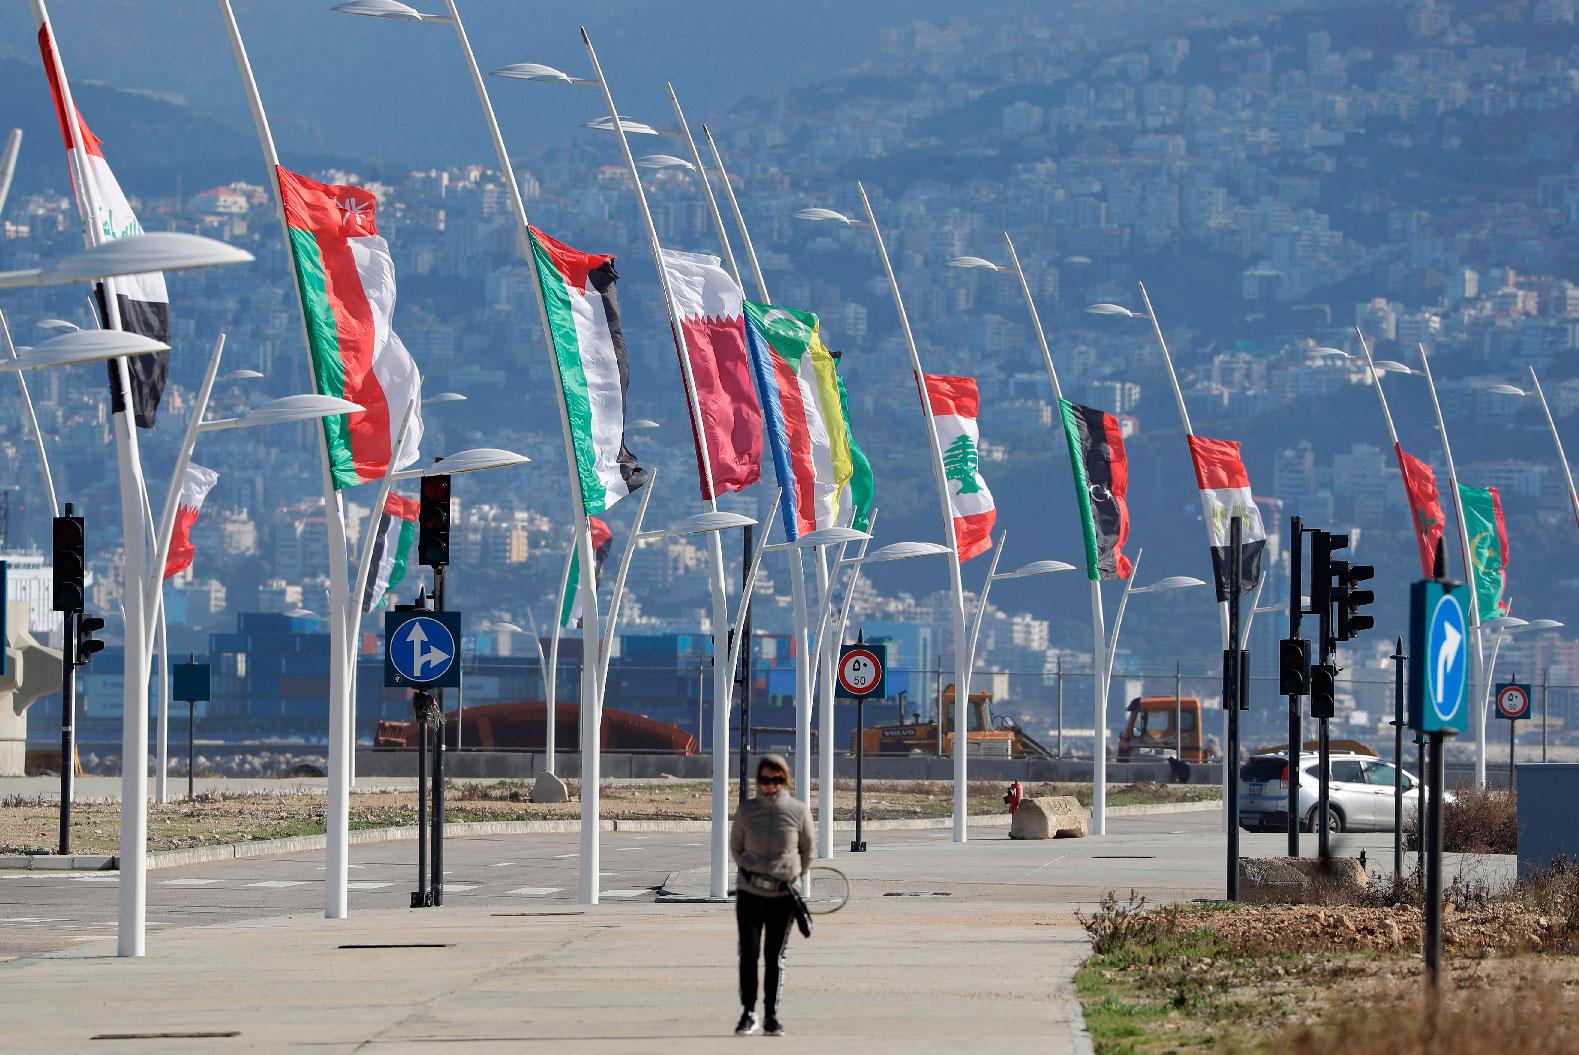 Flags of the Arab league states are seen on display ahead of the Arab Economic and Social Development Summit in Beirut on January 17, 2019.